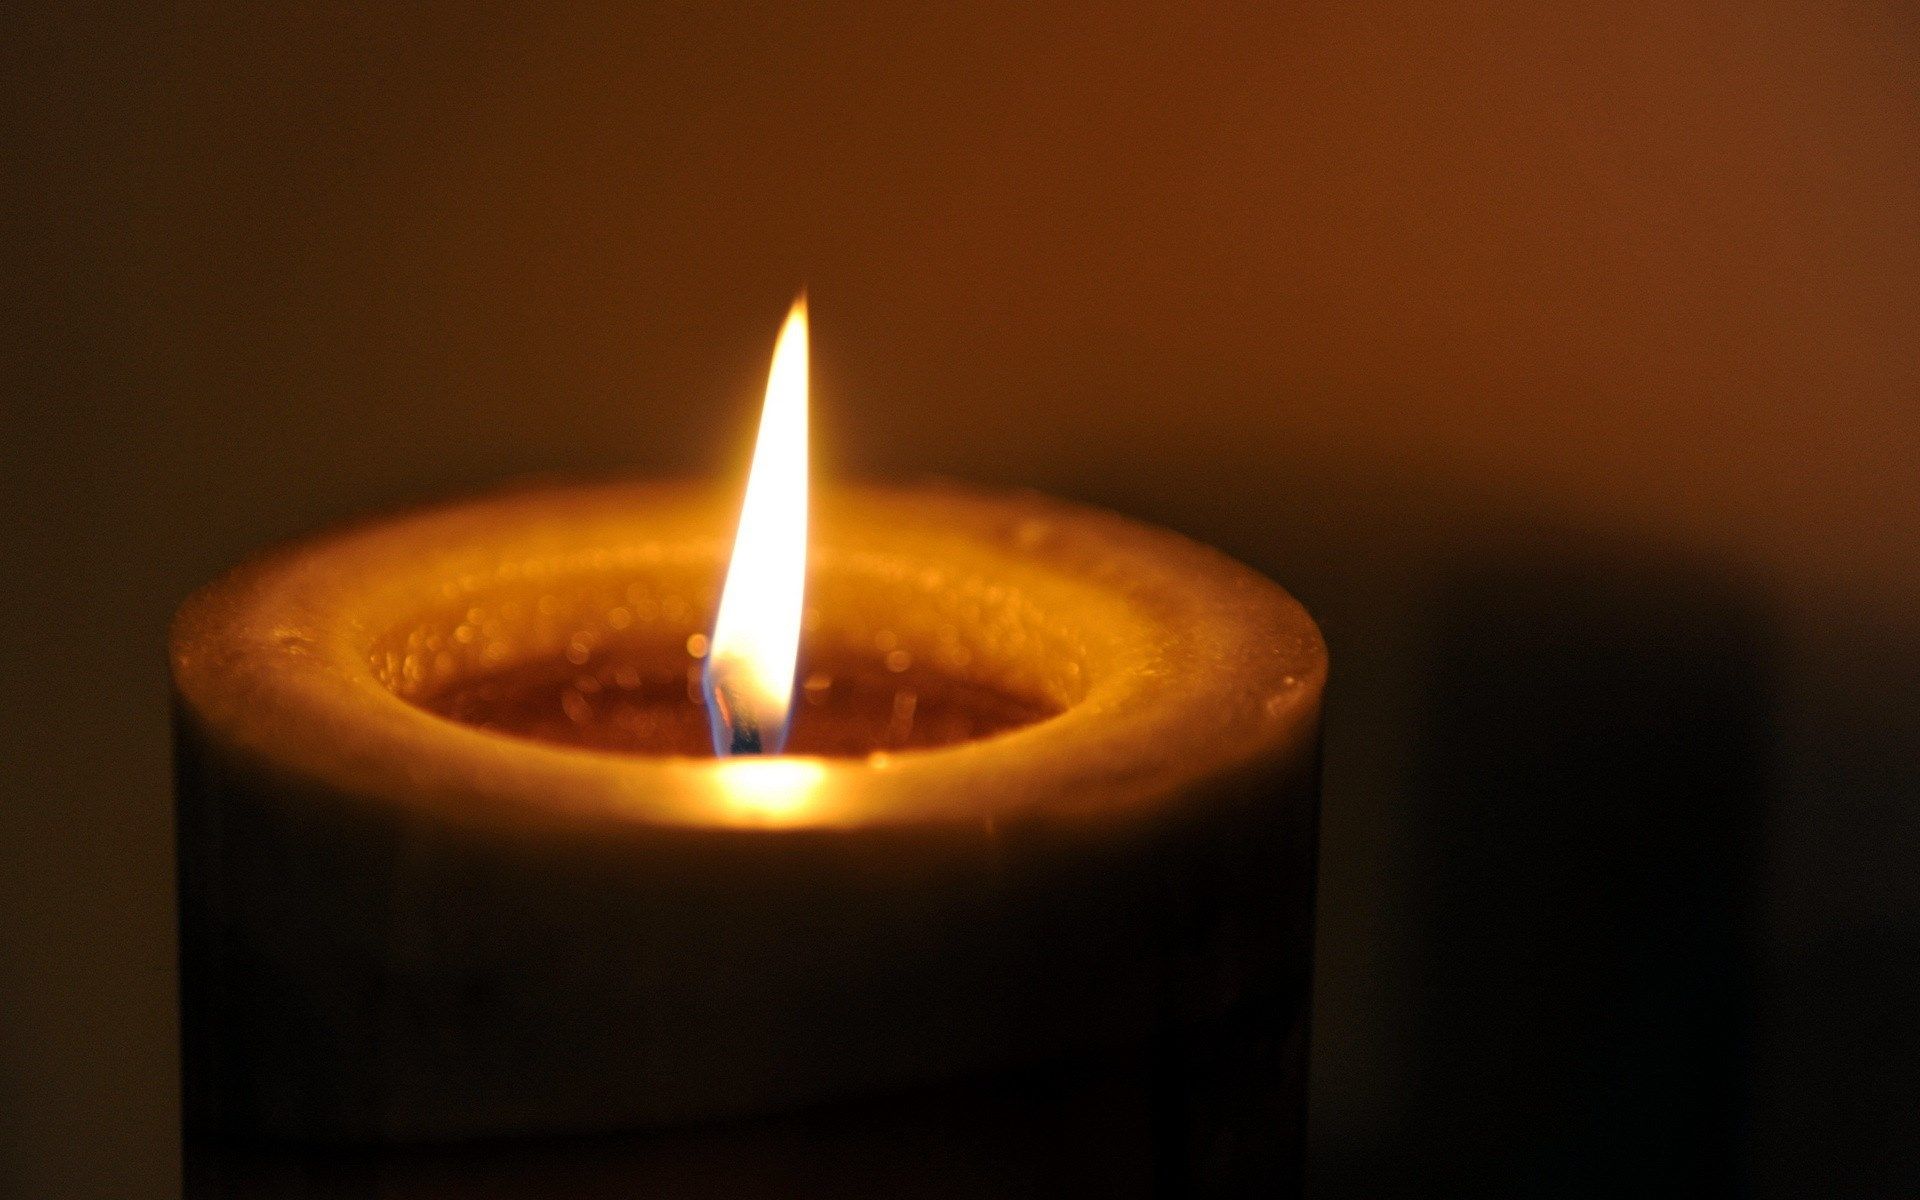 Candle Light HD Wallpaper, Candle Light Images, New Wallpapers